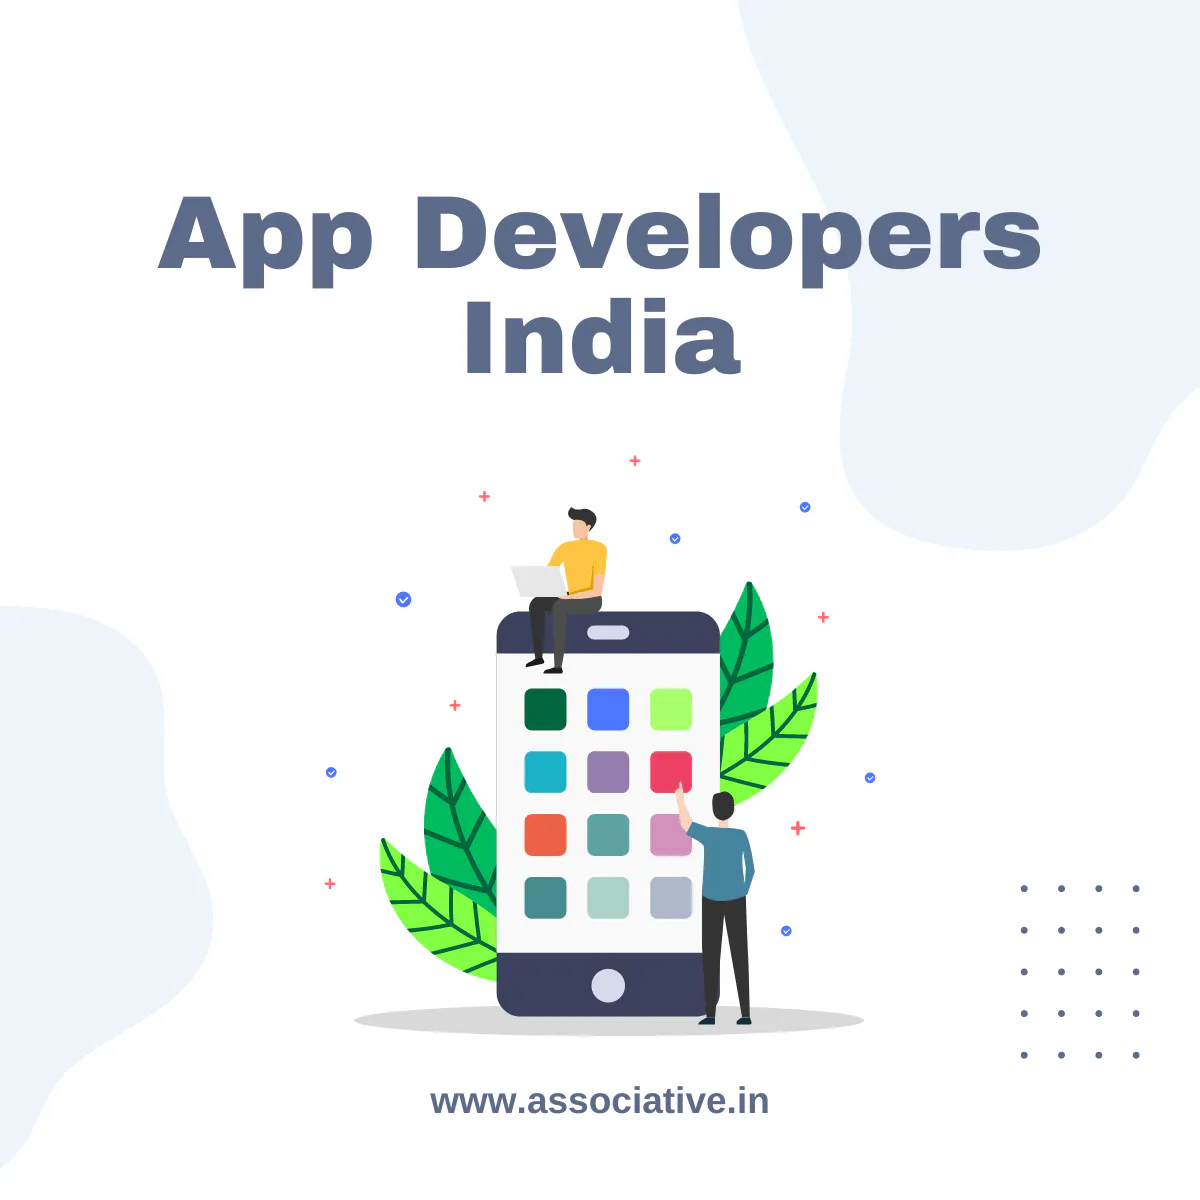 App Designer Near Me: Find the Best in Pune, India with Associative